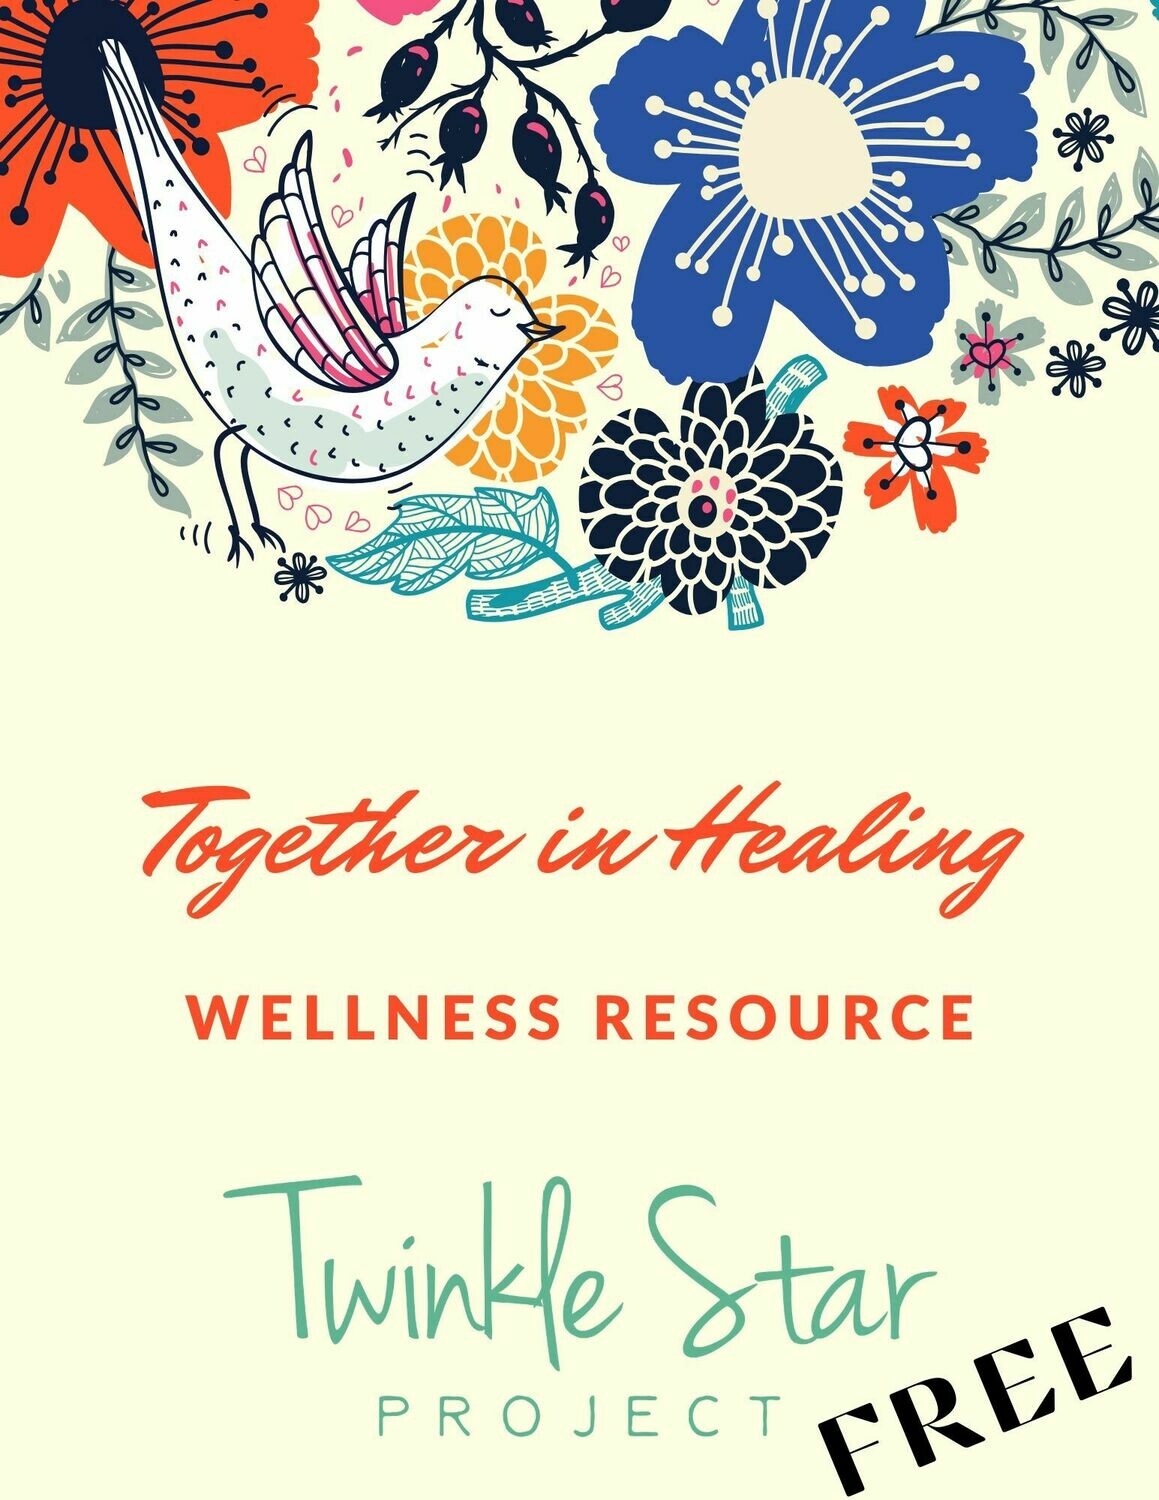 Together in Healing - Wellness Resource